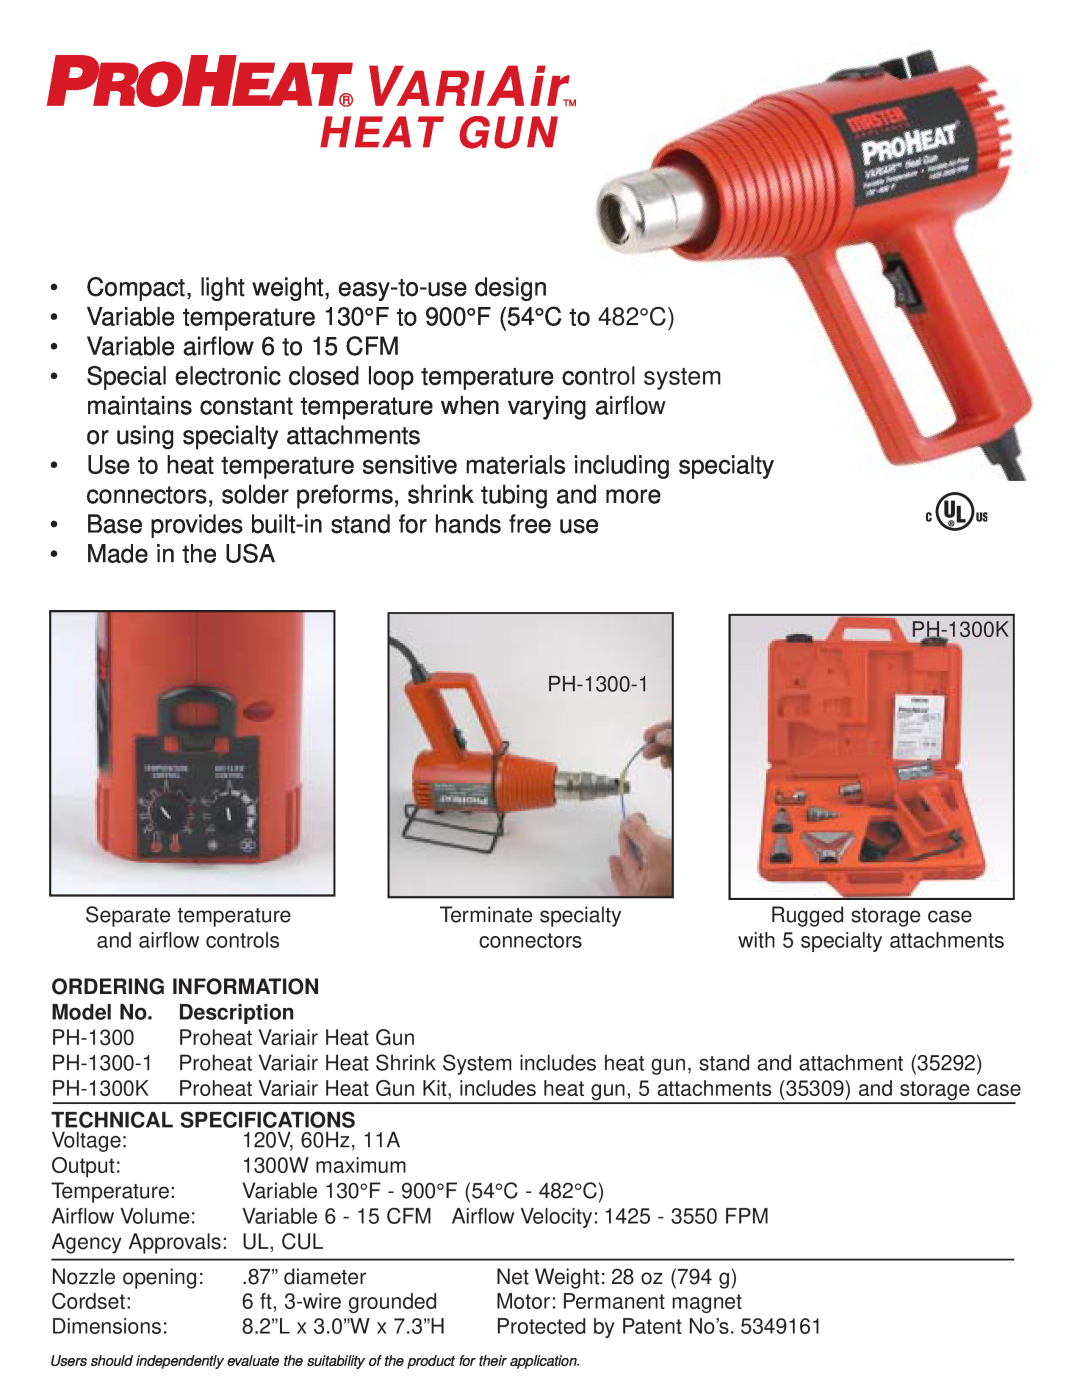 Master Appliance PH-1200-1 Heat Gun, Compact, light weight, easy-to-use design, Variable airflow 6 to 15 CFM, VARIAir 